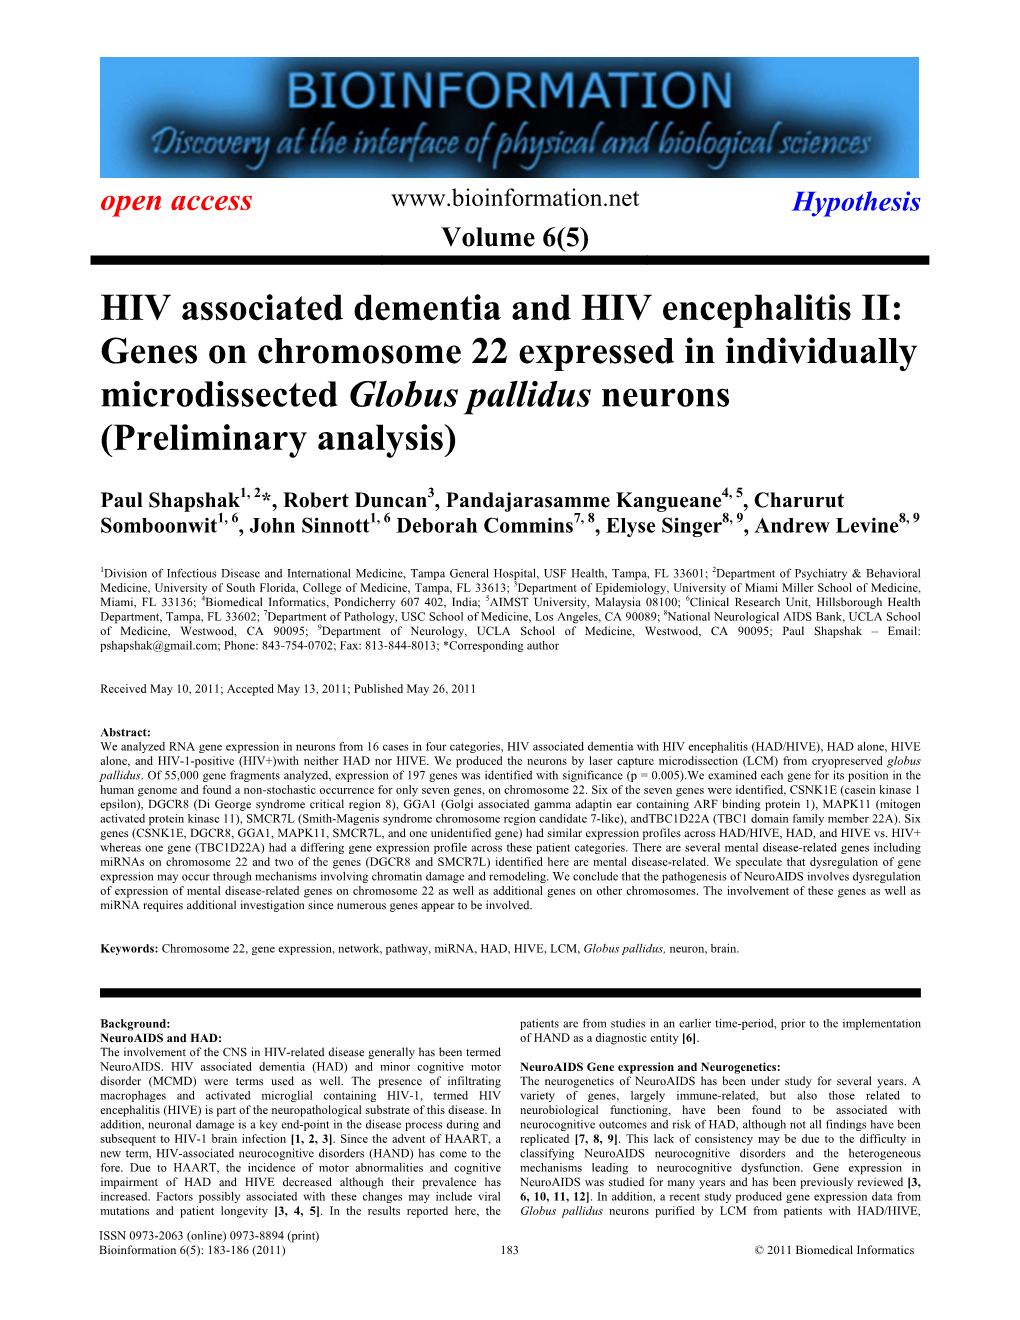 HIV Associated Dementia and HIV Encephalitis II: Genes on Chromosome 22 Expressed in Individually Microdissected Globus Pallidus Neurons (Preliminary Analysis)